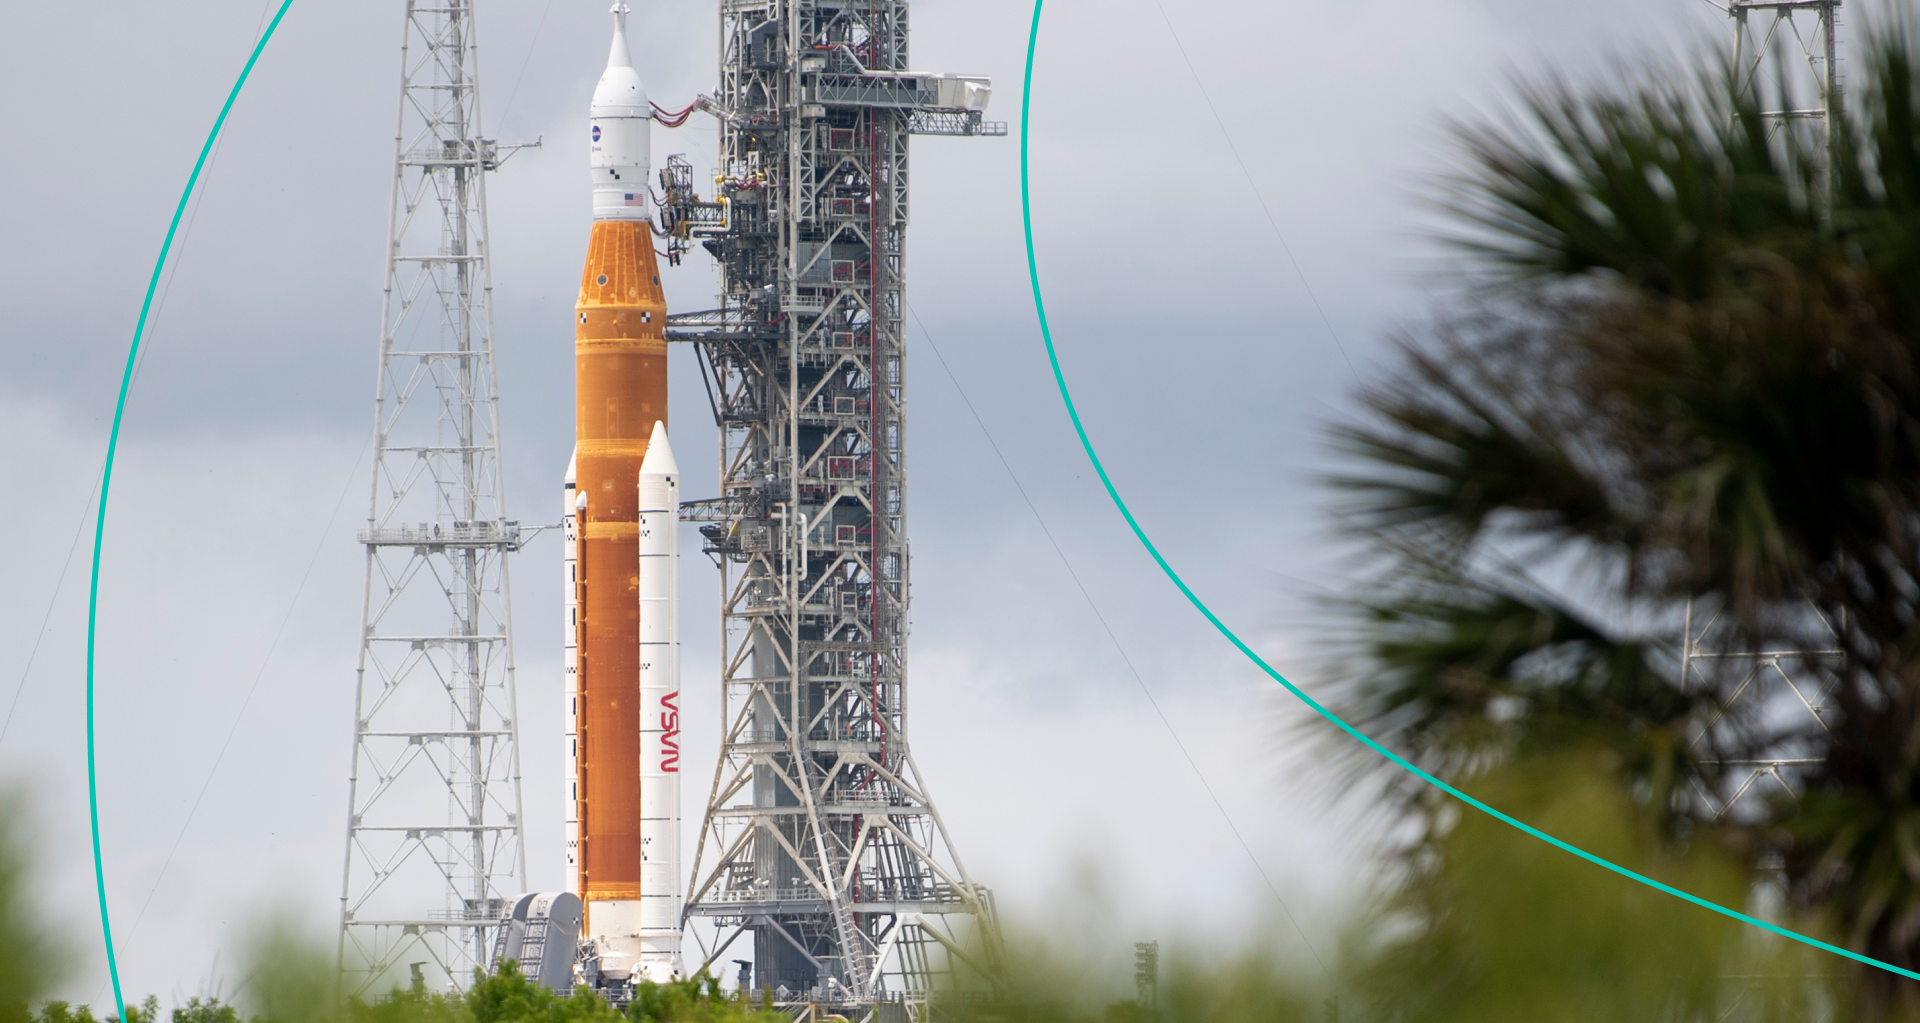 In this handout image provided by NASA, NASA's Space Launch System (SLS) rocket with the Orion spacecraft aboard is seen atop a mobile launcher